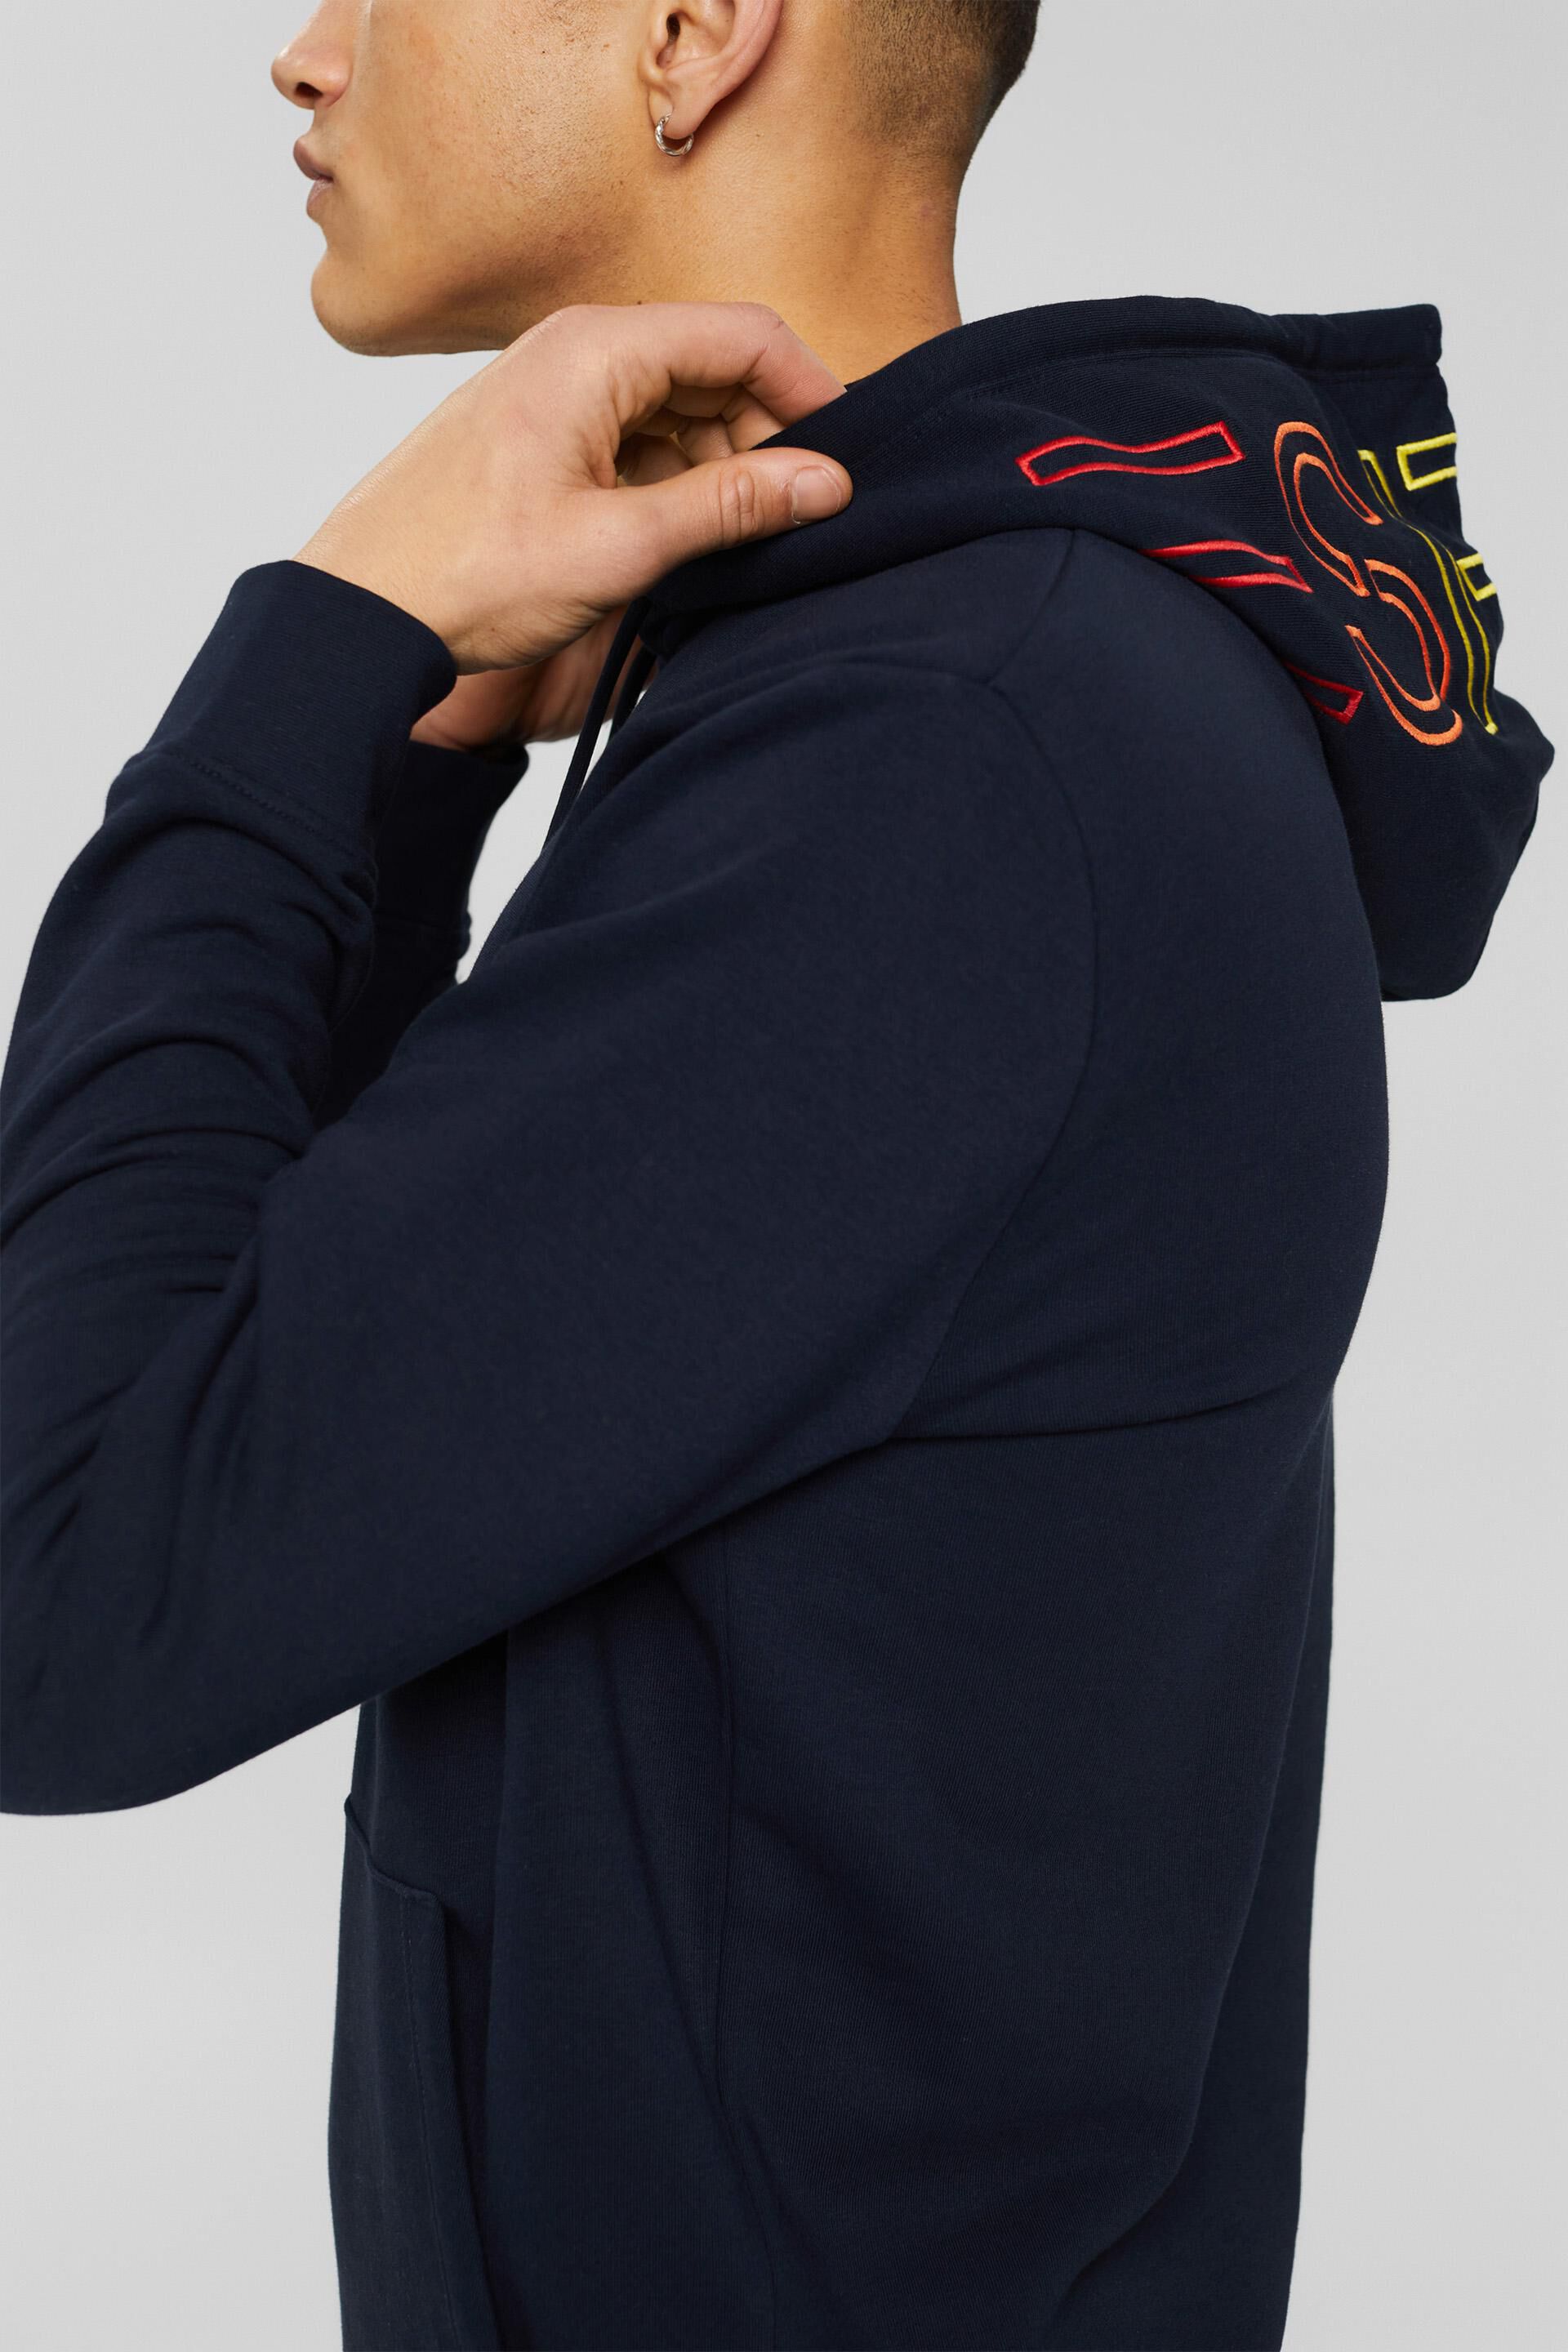 Esprit blended logo with embroidery, cotton Hoodie